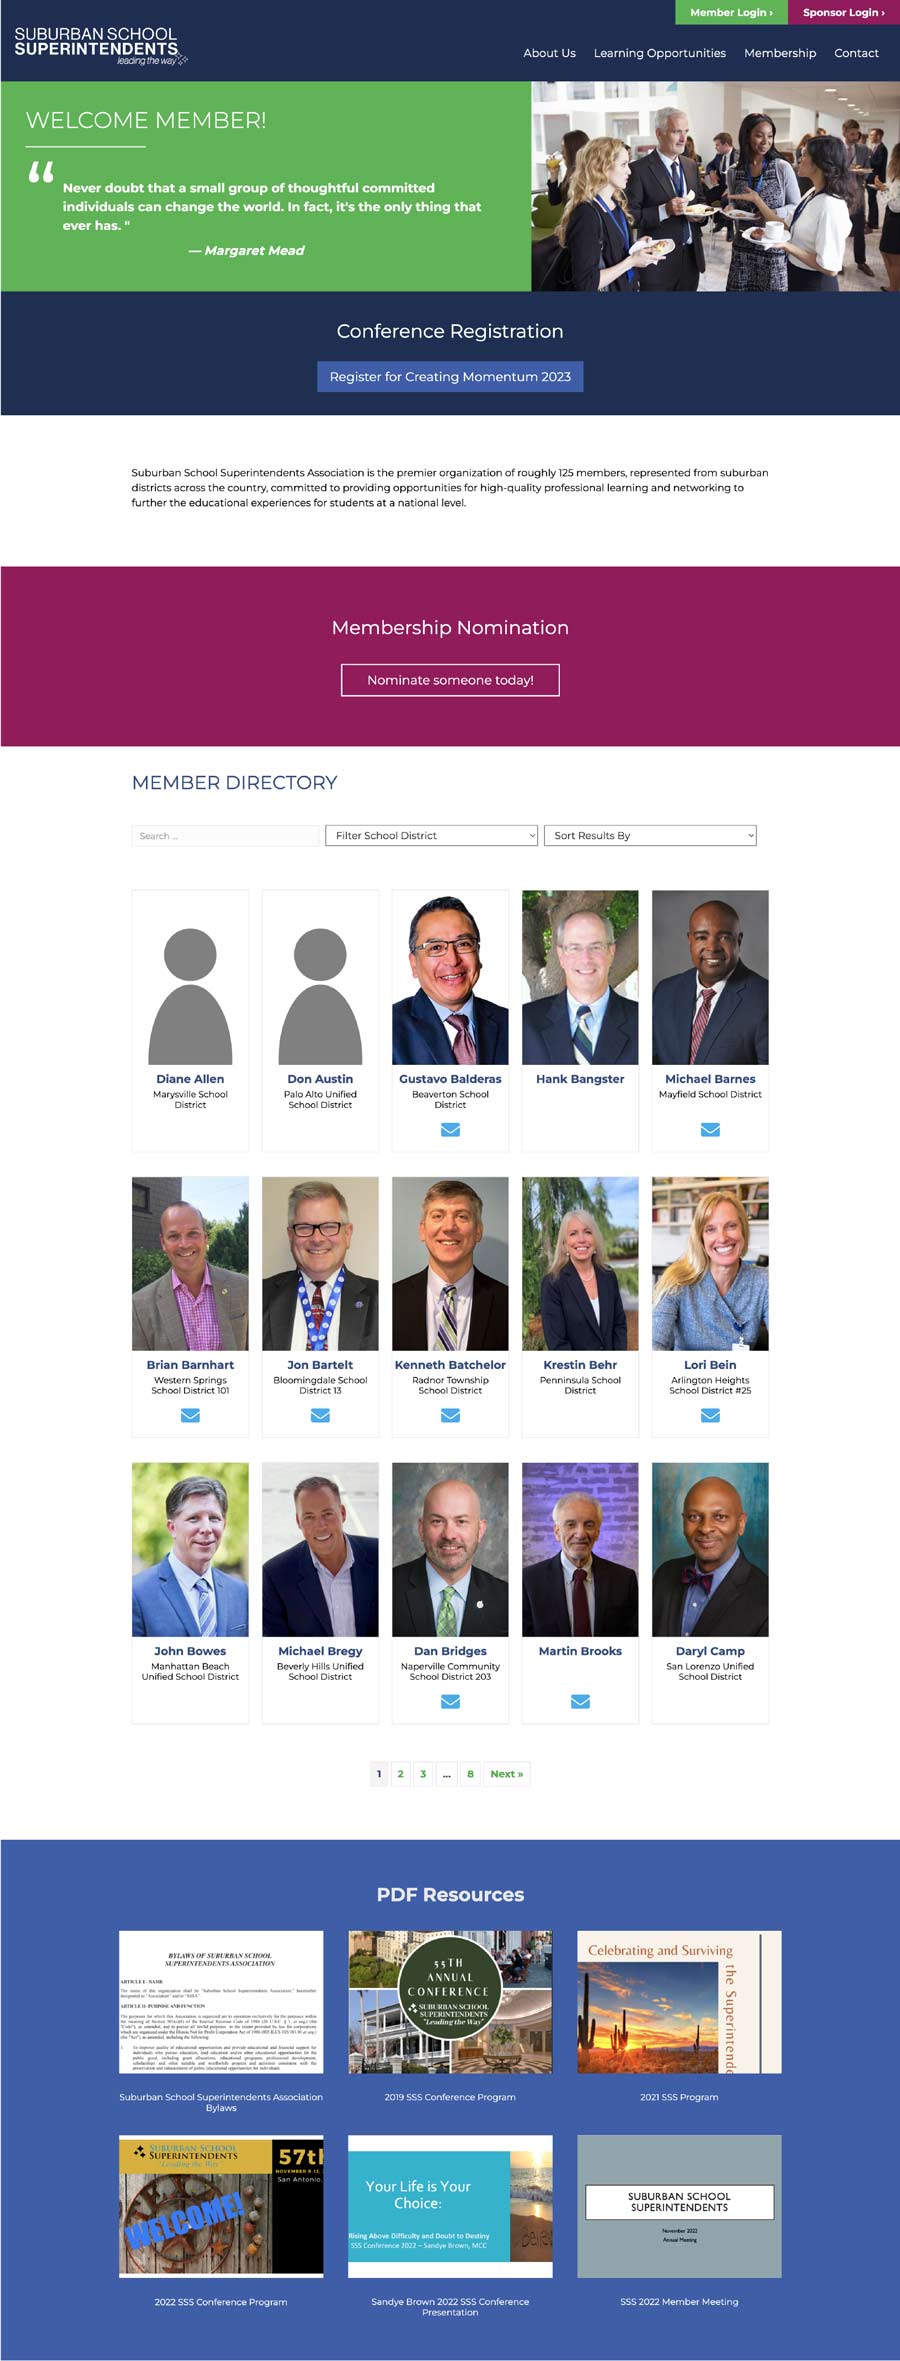 Screenshot of a page from the Suburban schools superintendents website.